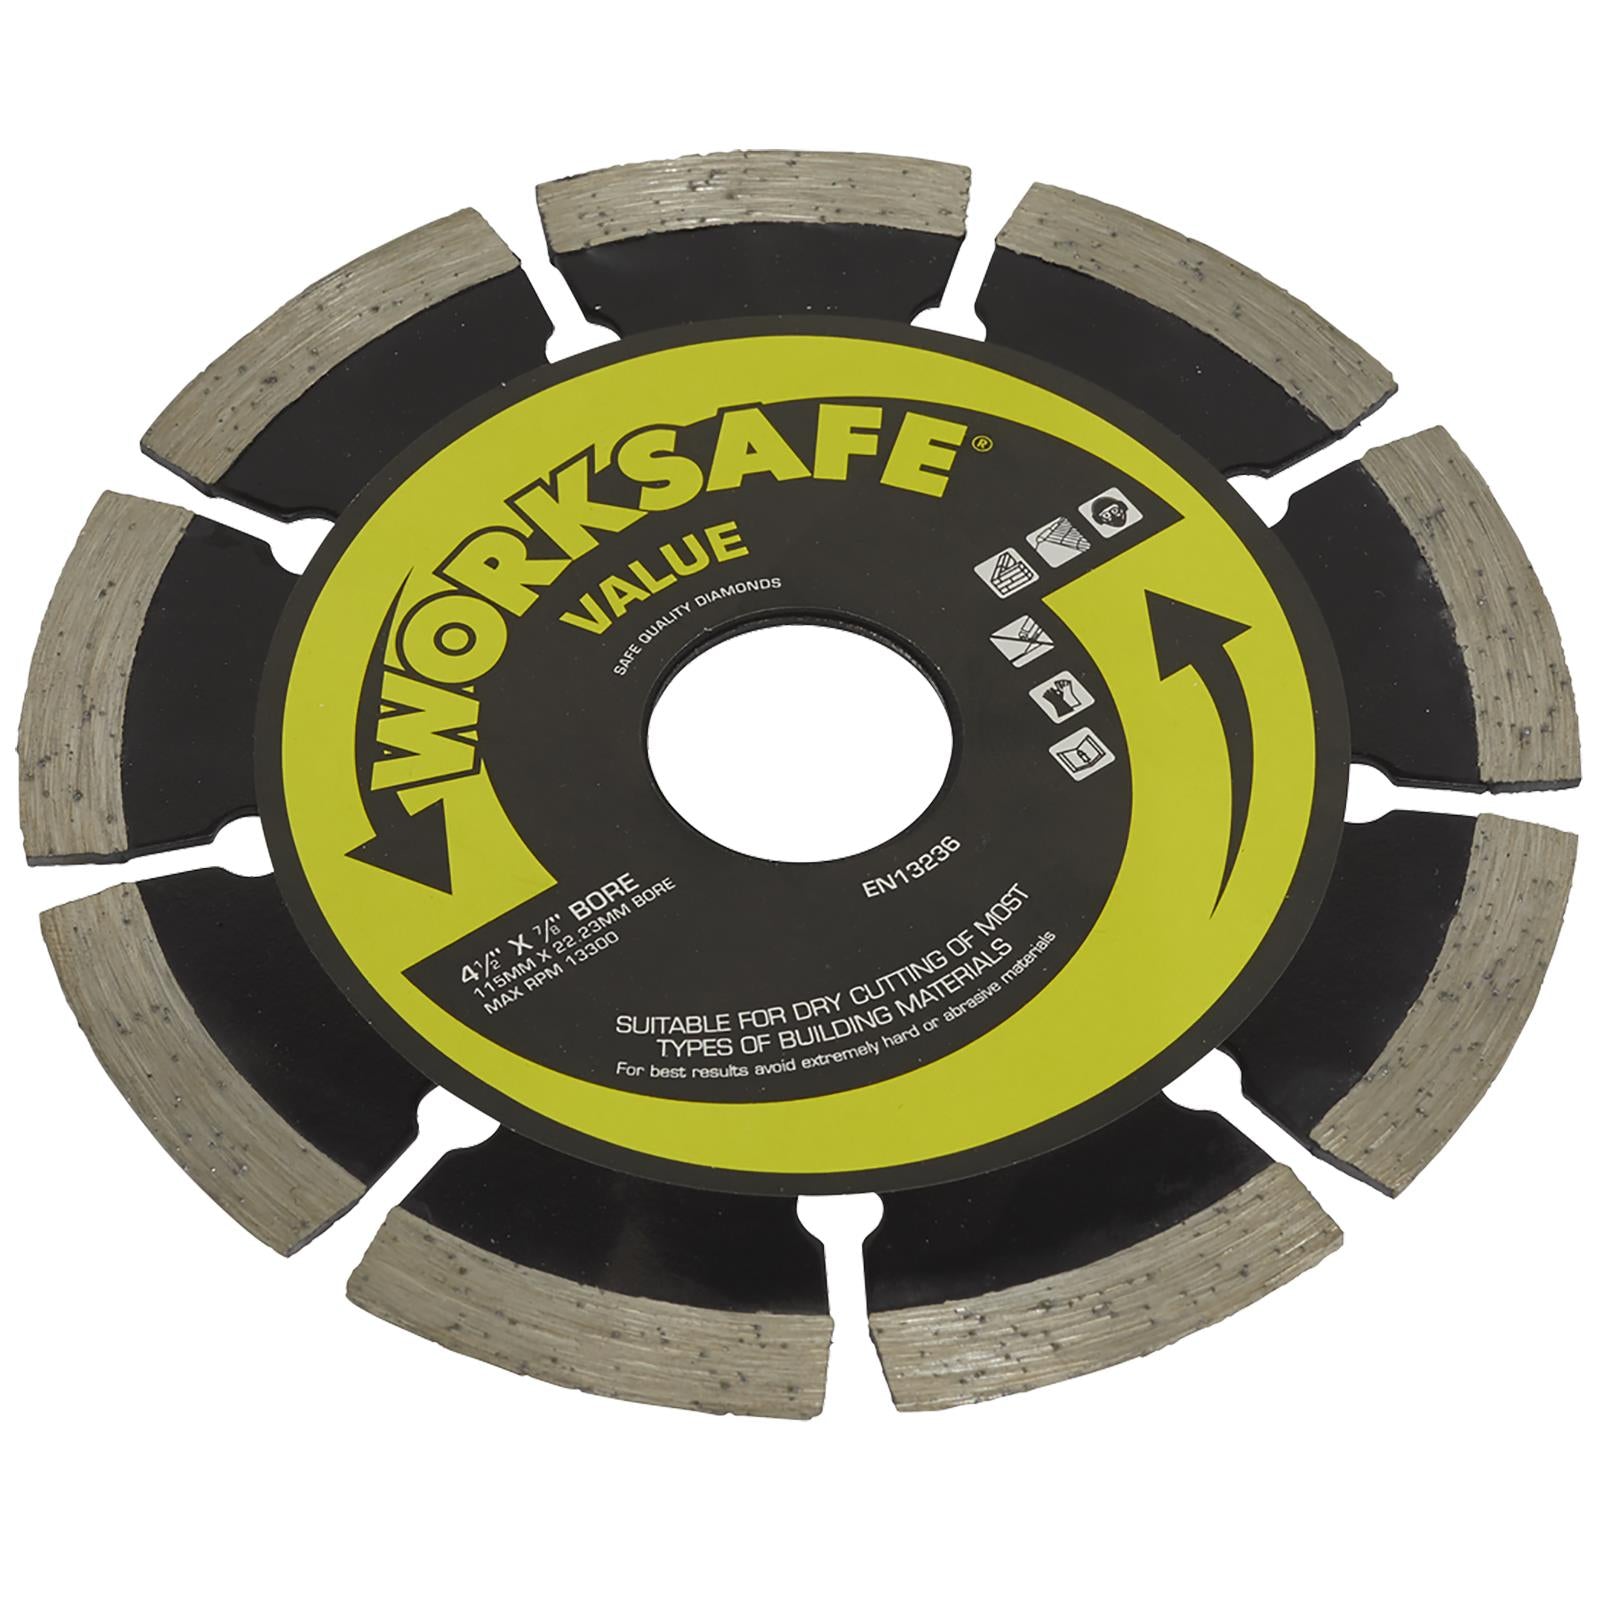 Worksafe by Sealey Value Diamond Cutting Blade 115mm x 22mm